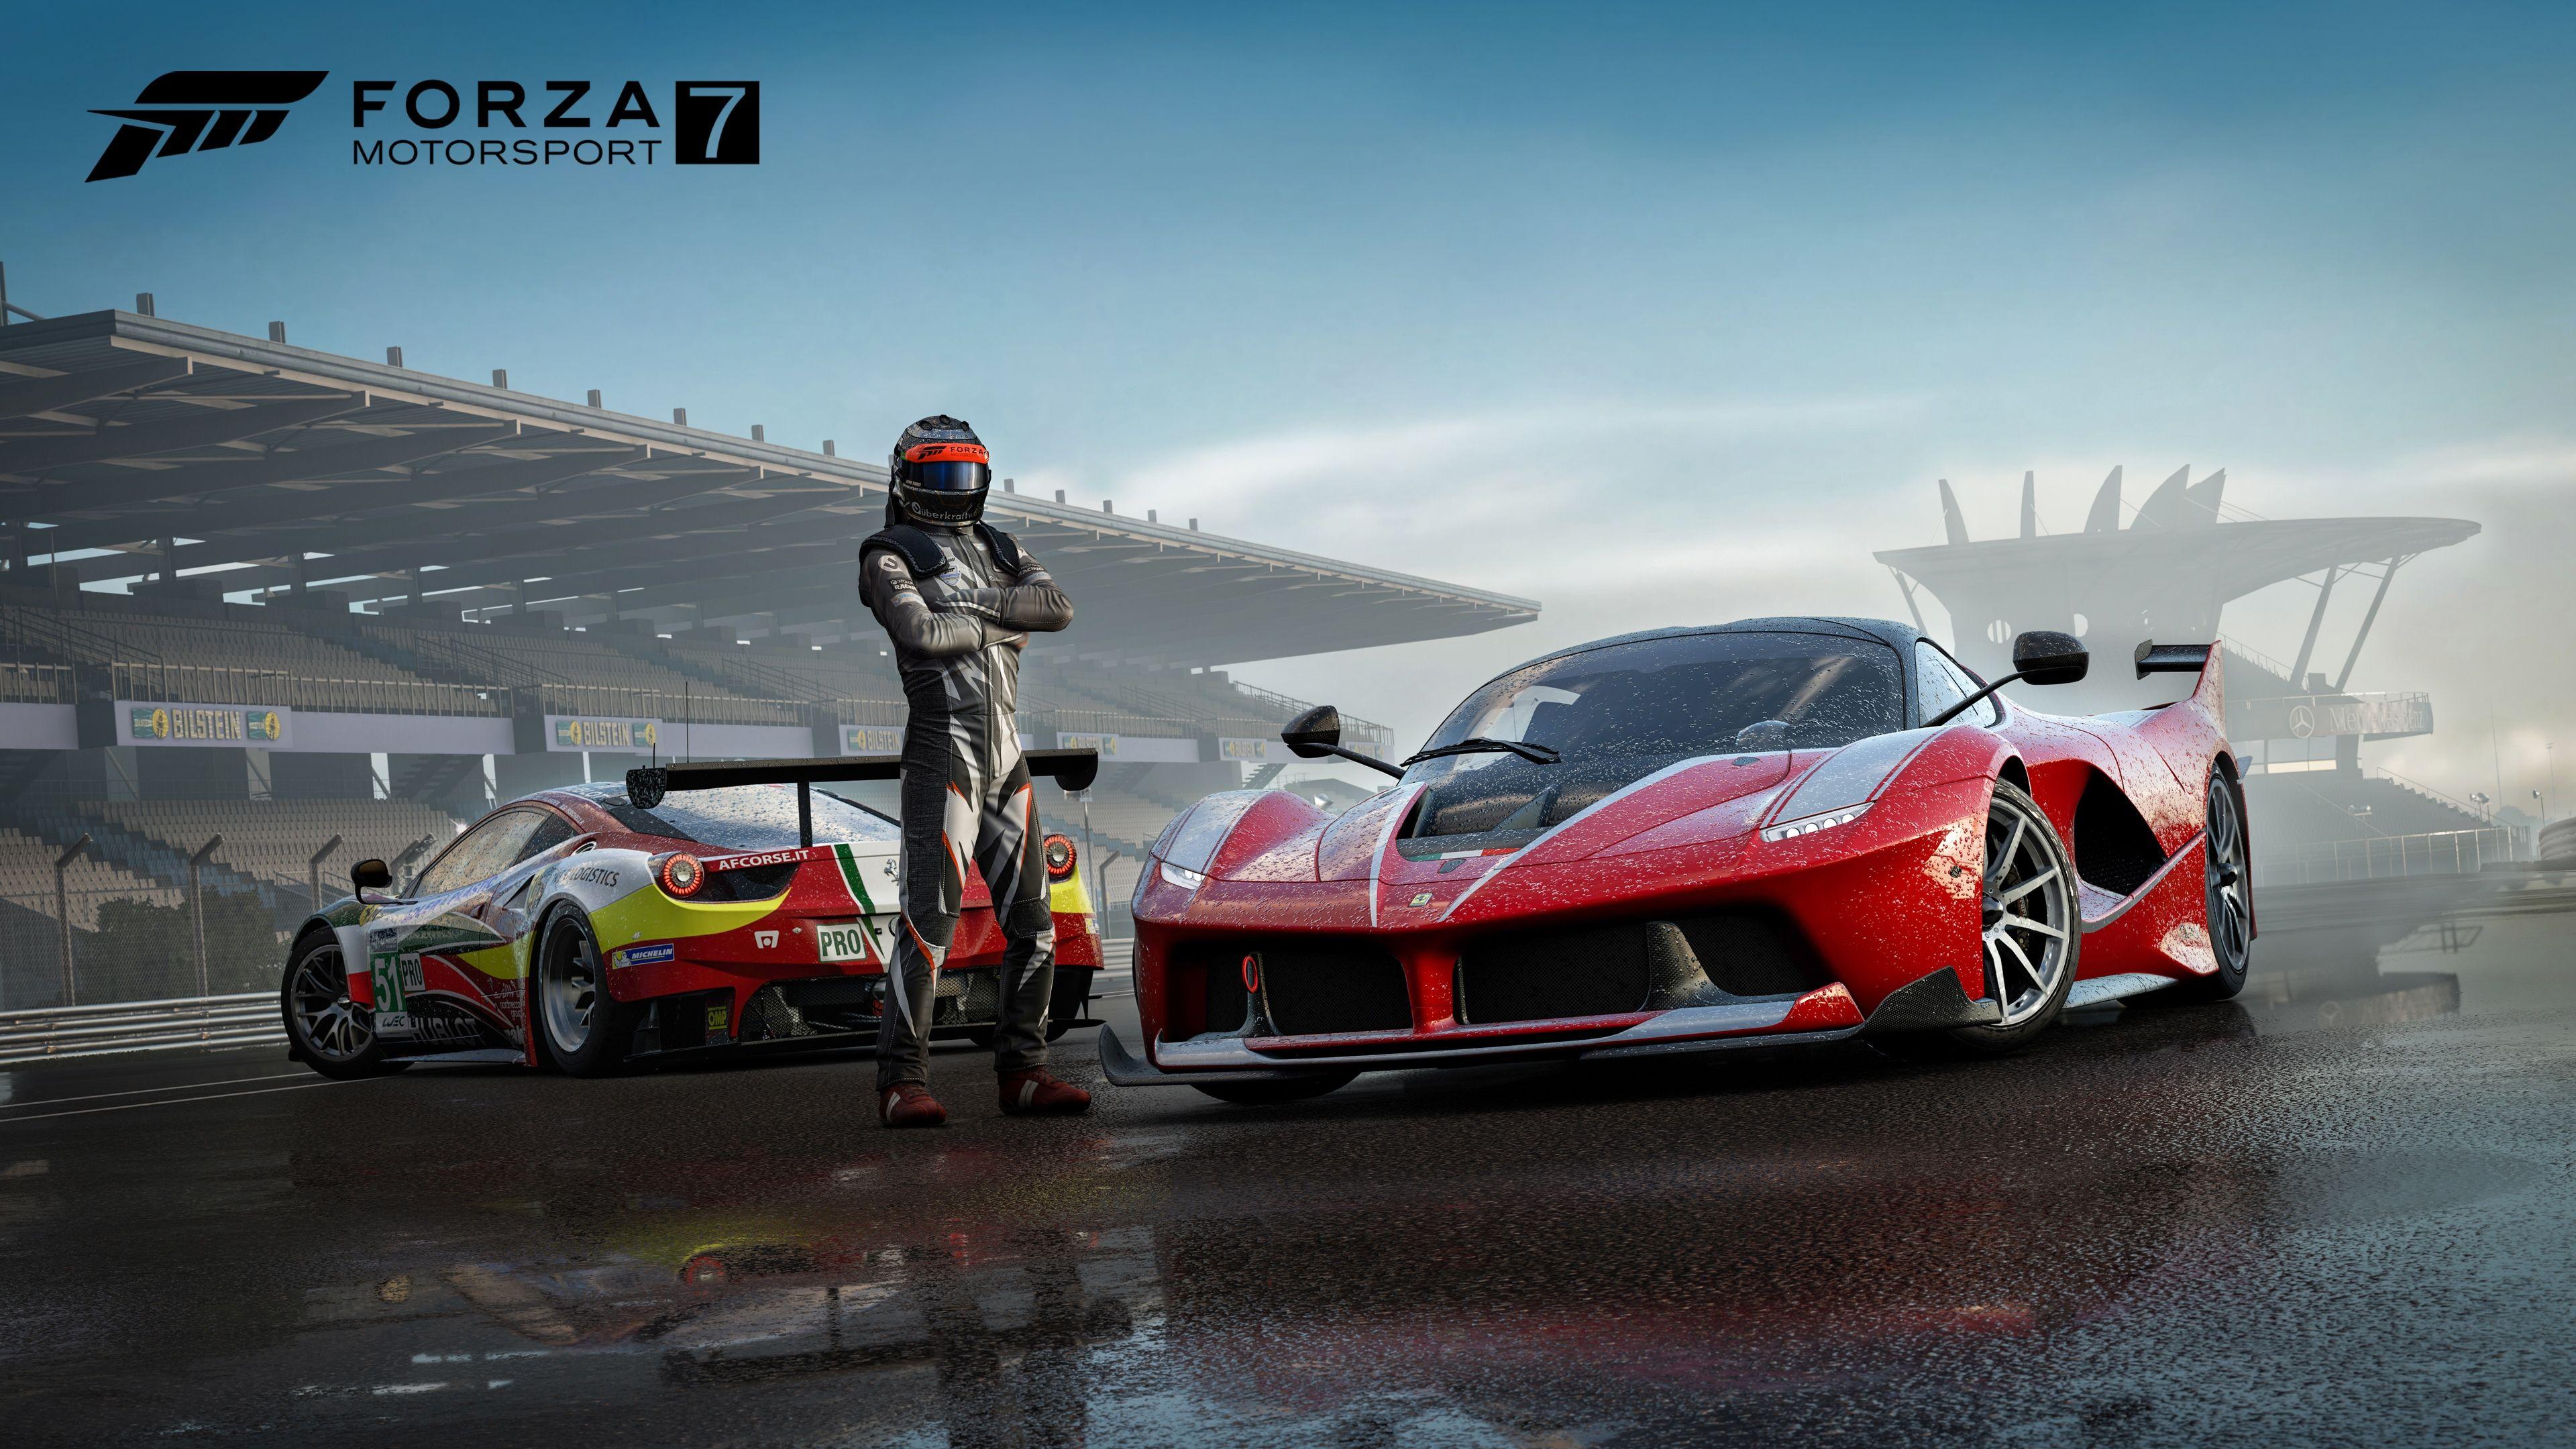 UHD 4K Race Cars with Driver Forza Motorsport 7